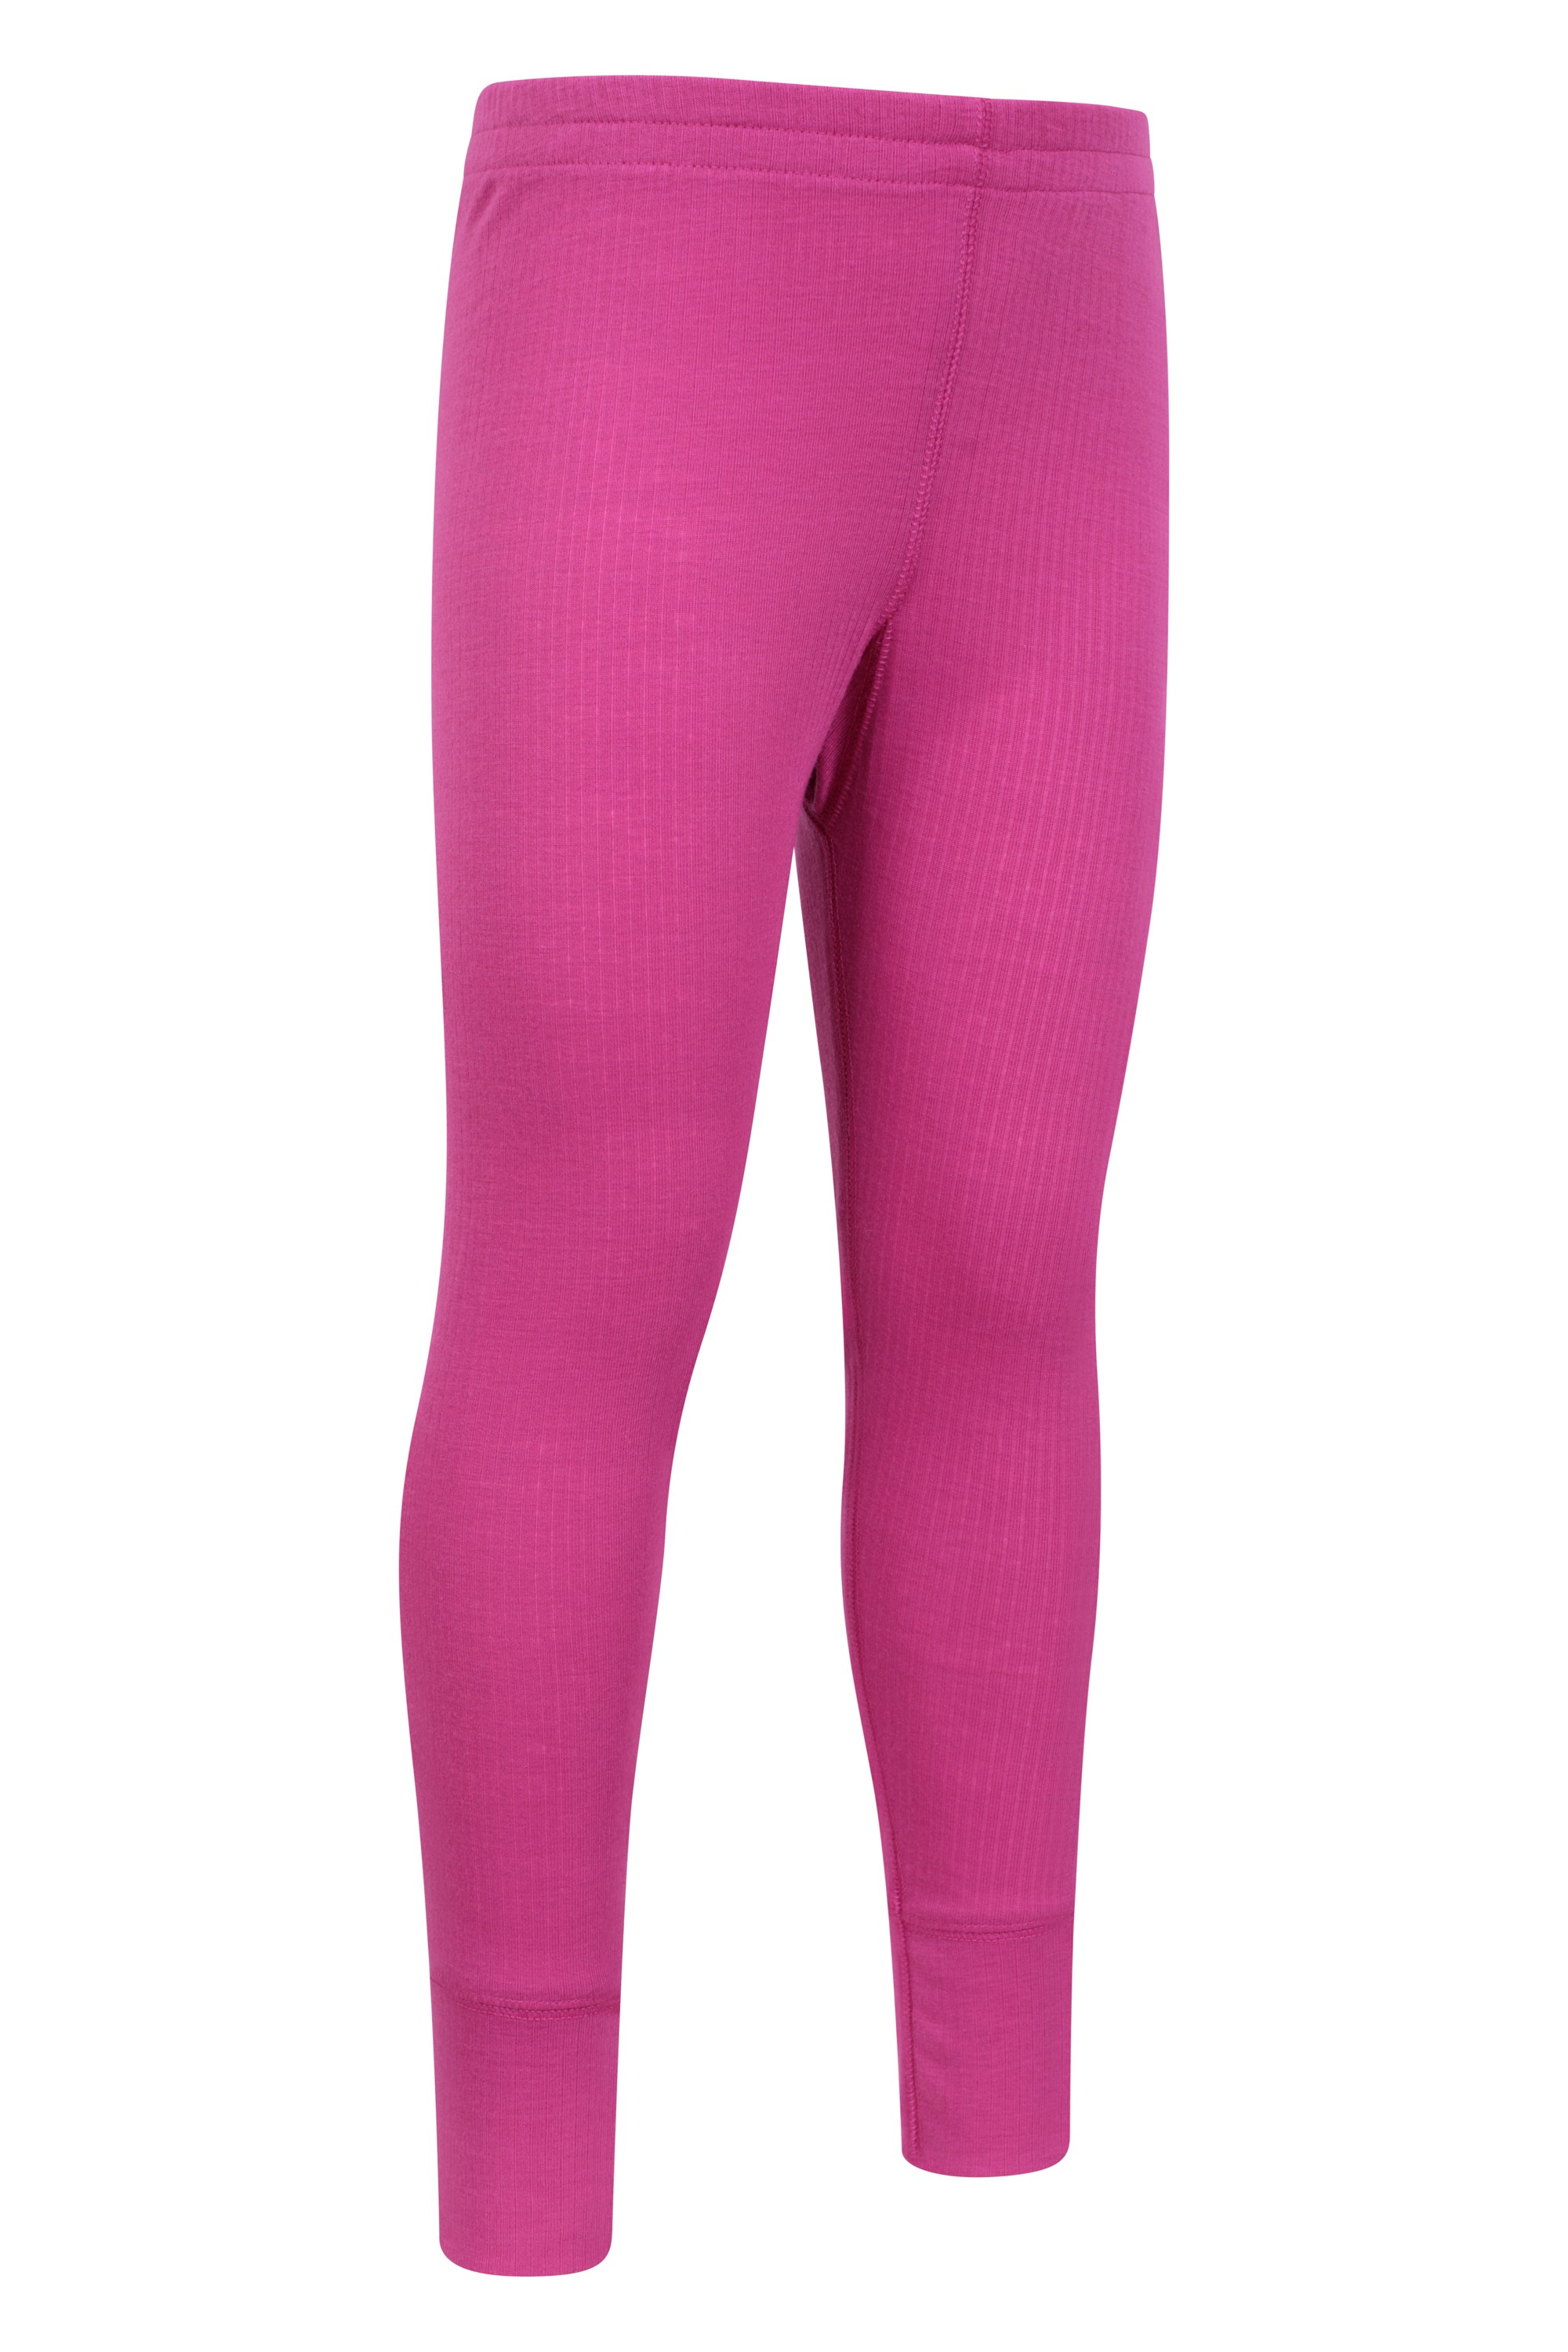 Buy Animal Kids Pink Adventure Thermal Leggings from Next Luxembourg